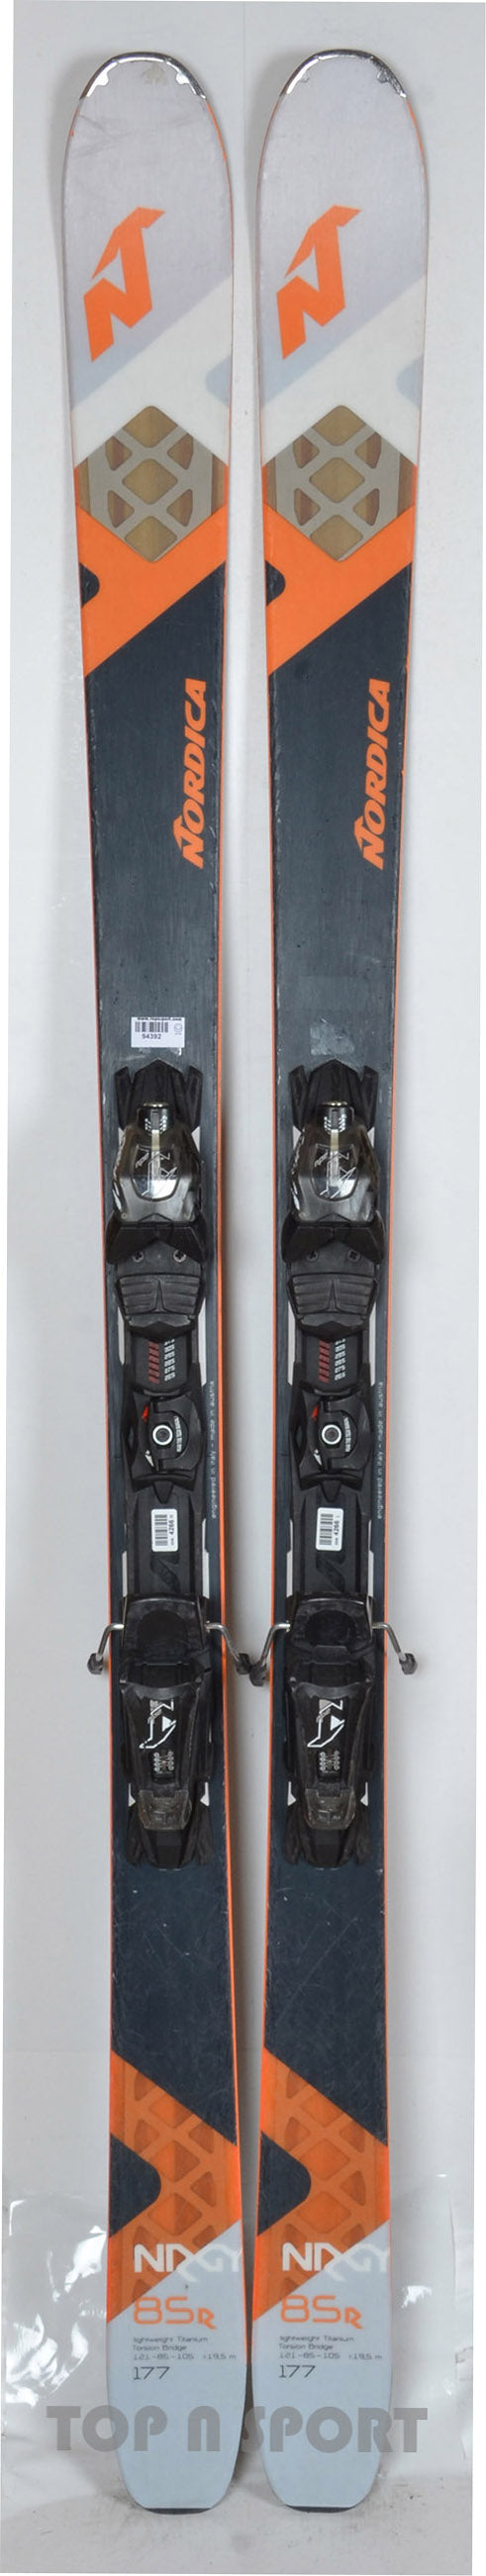 Nordica NRGY 85 R - skis d'occasion